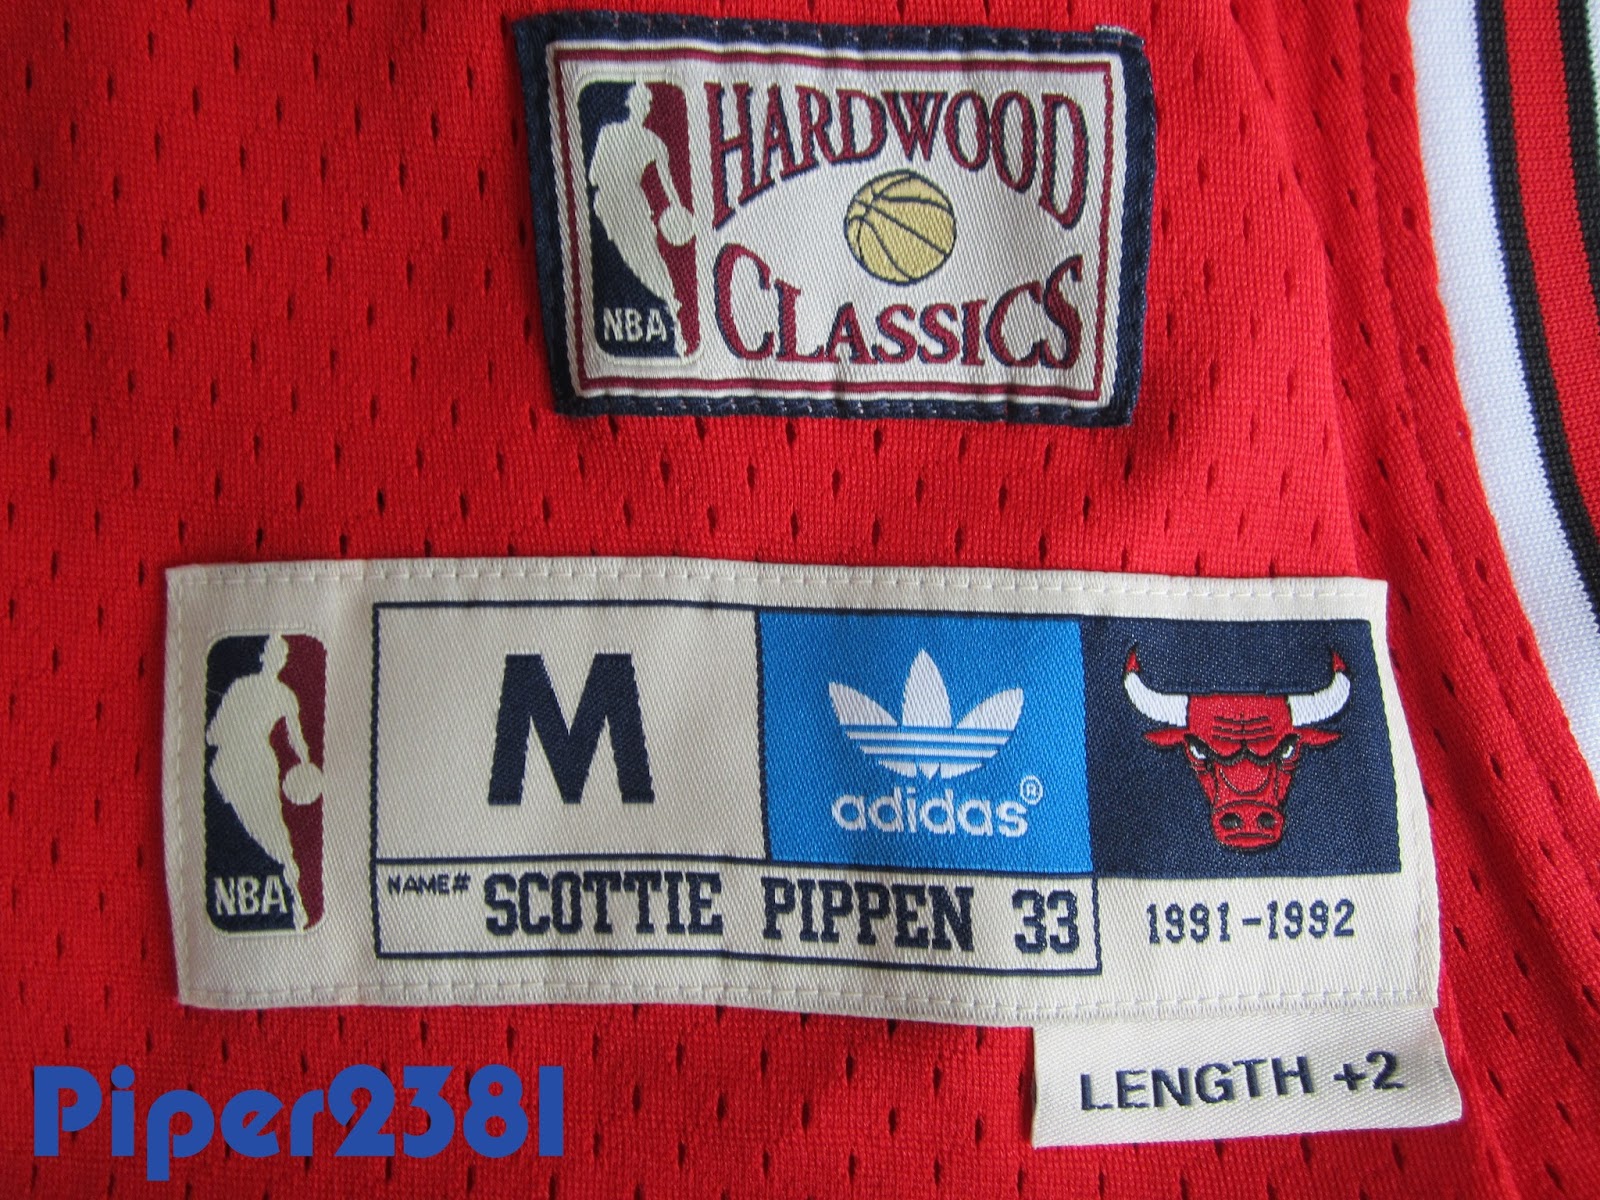 adidas pippen jersey